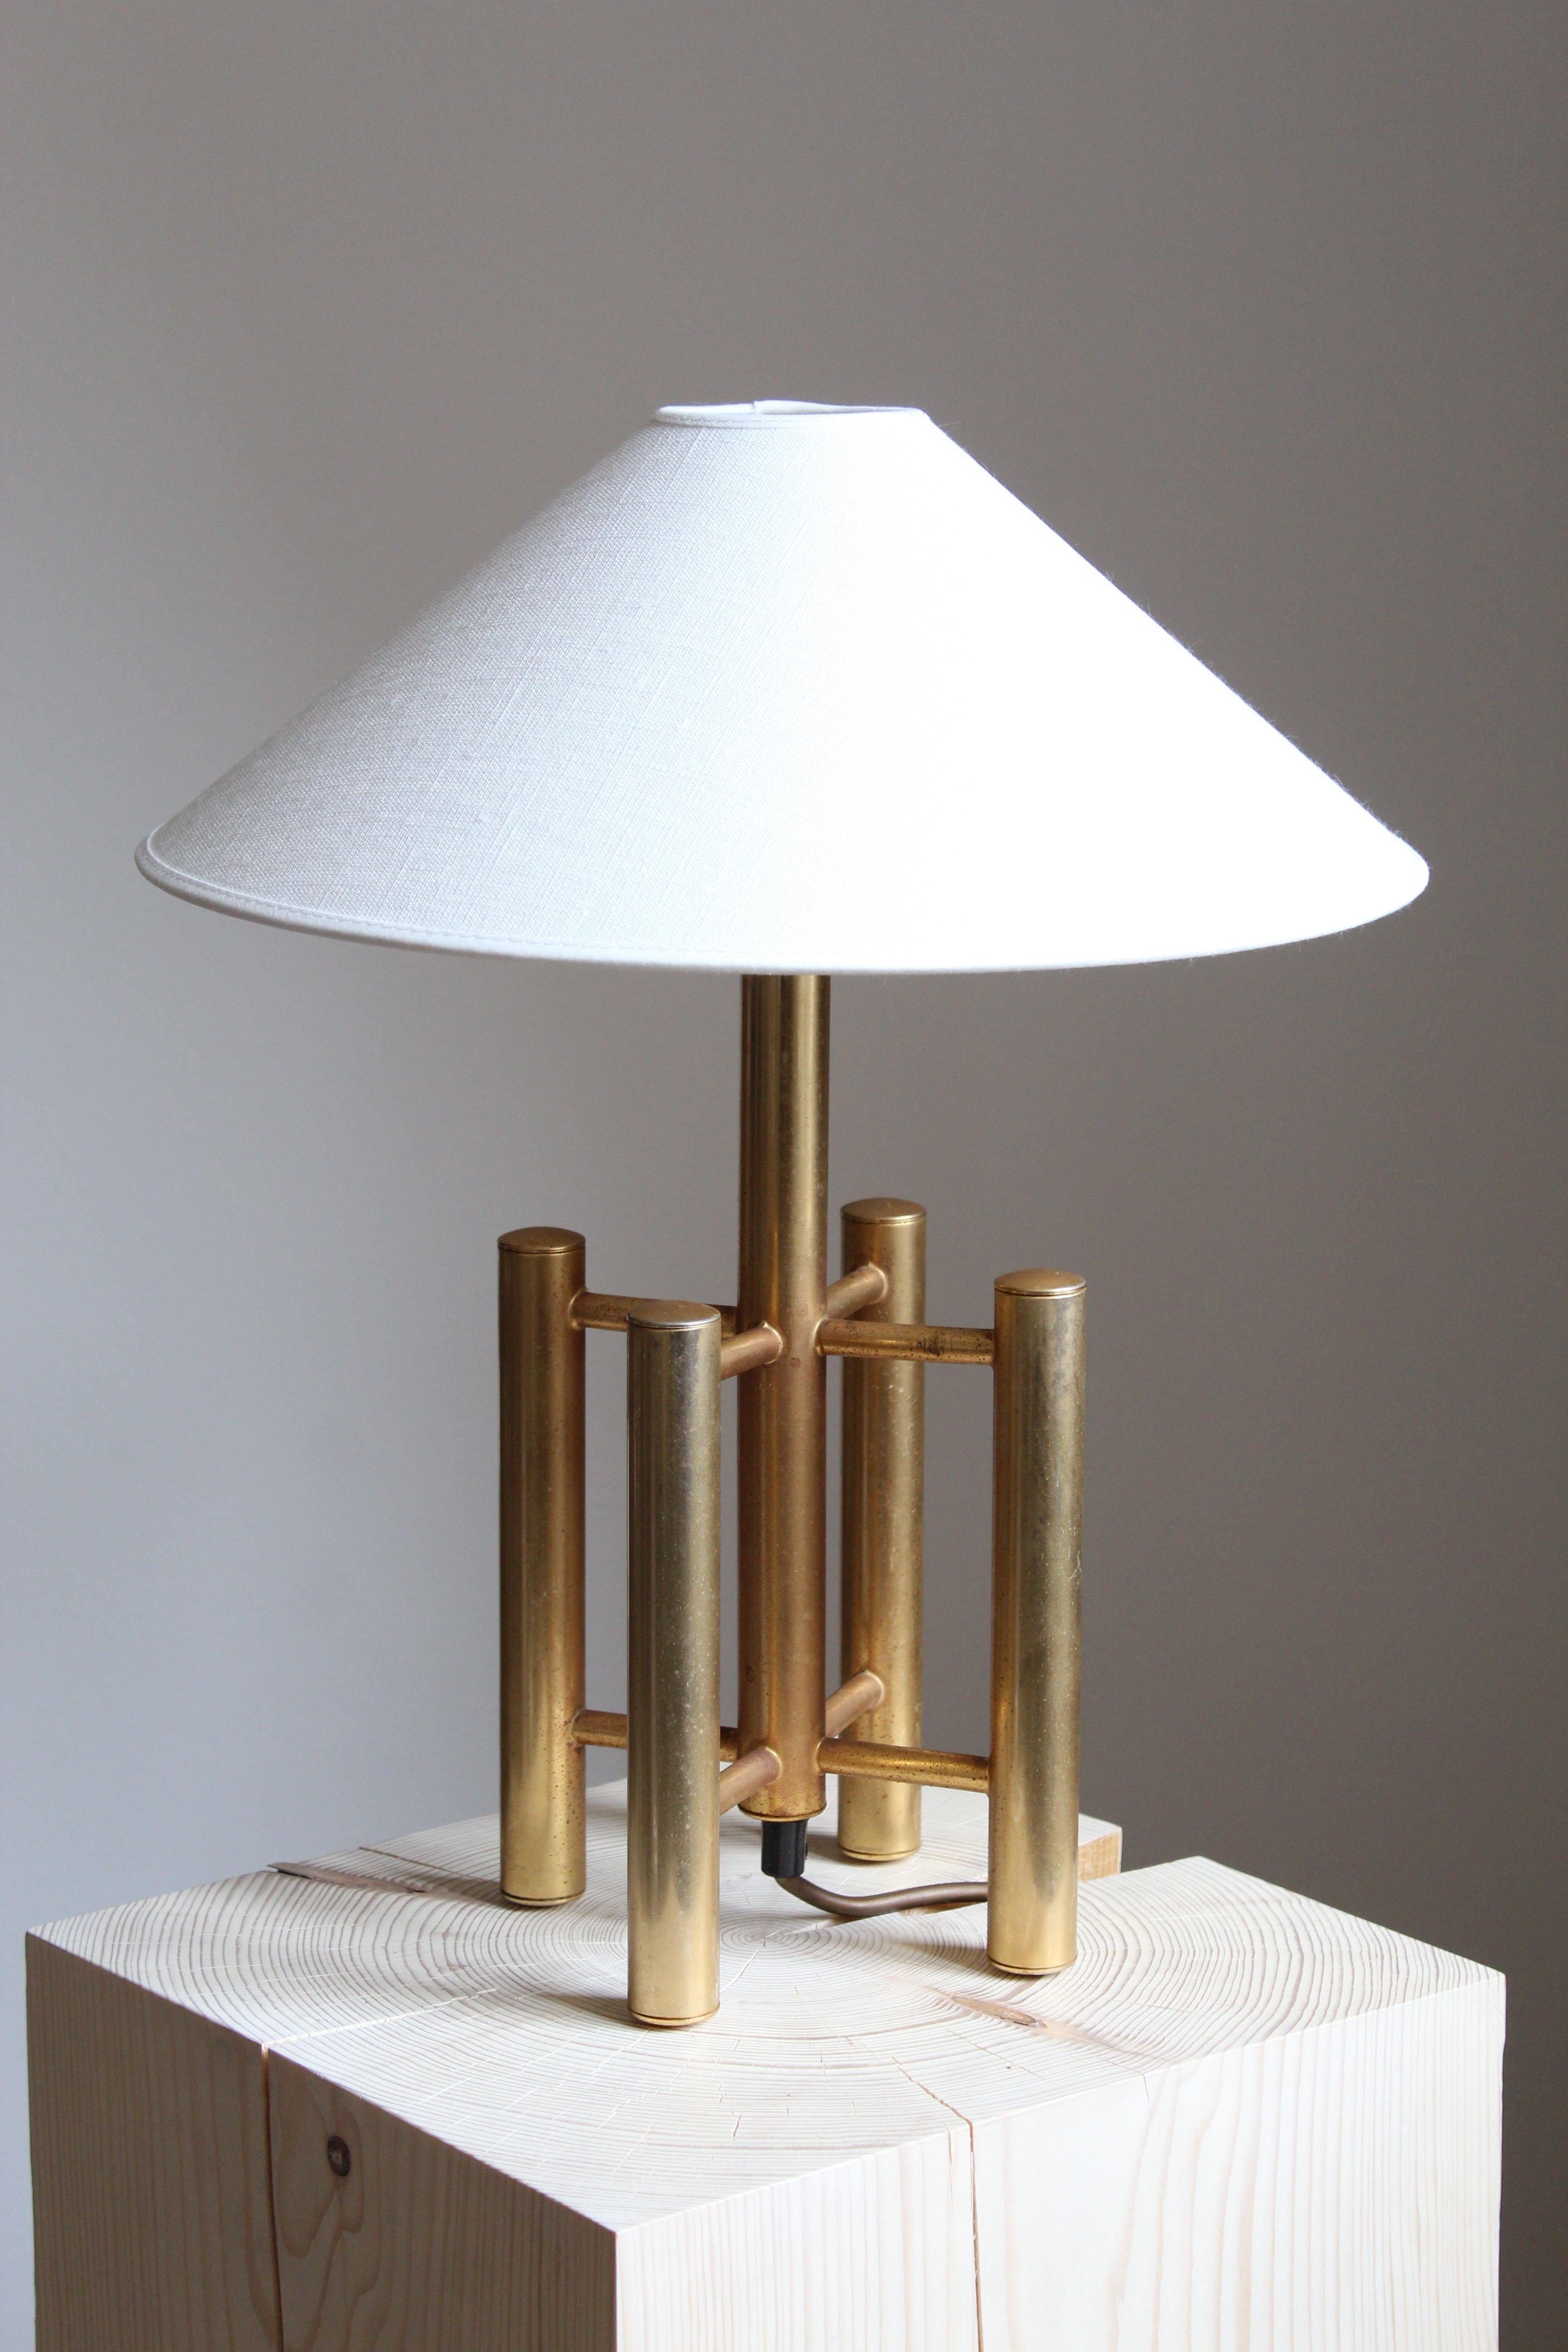 A table lamp. Designed and produced in Italy, 1970s. In brass with metal hardware. 

Sold without lampshade.

Other designers and makers of the period include Gabriella Crespi, Maria Pergay, Max Ingrand, Stilnovo, and Fontana Arte.